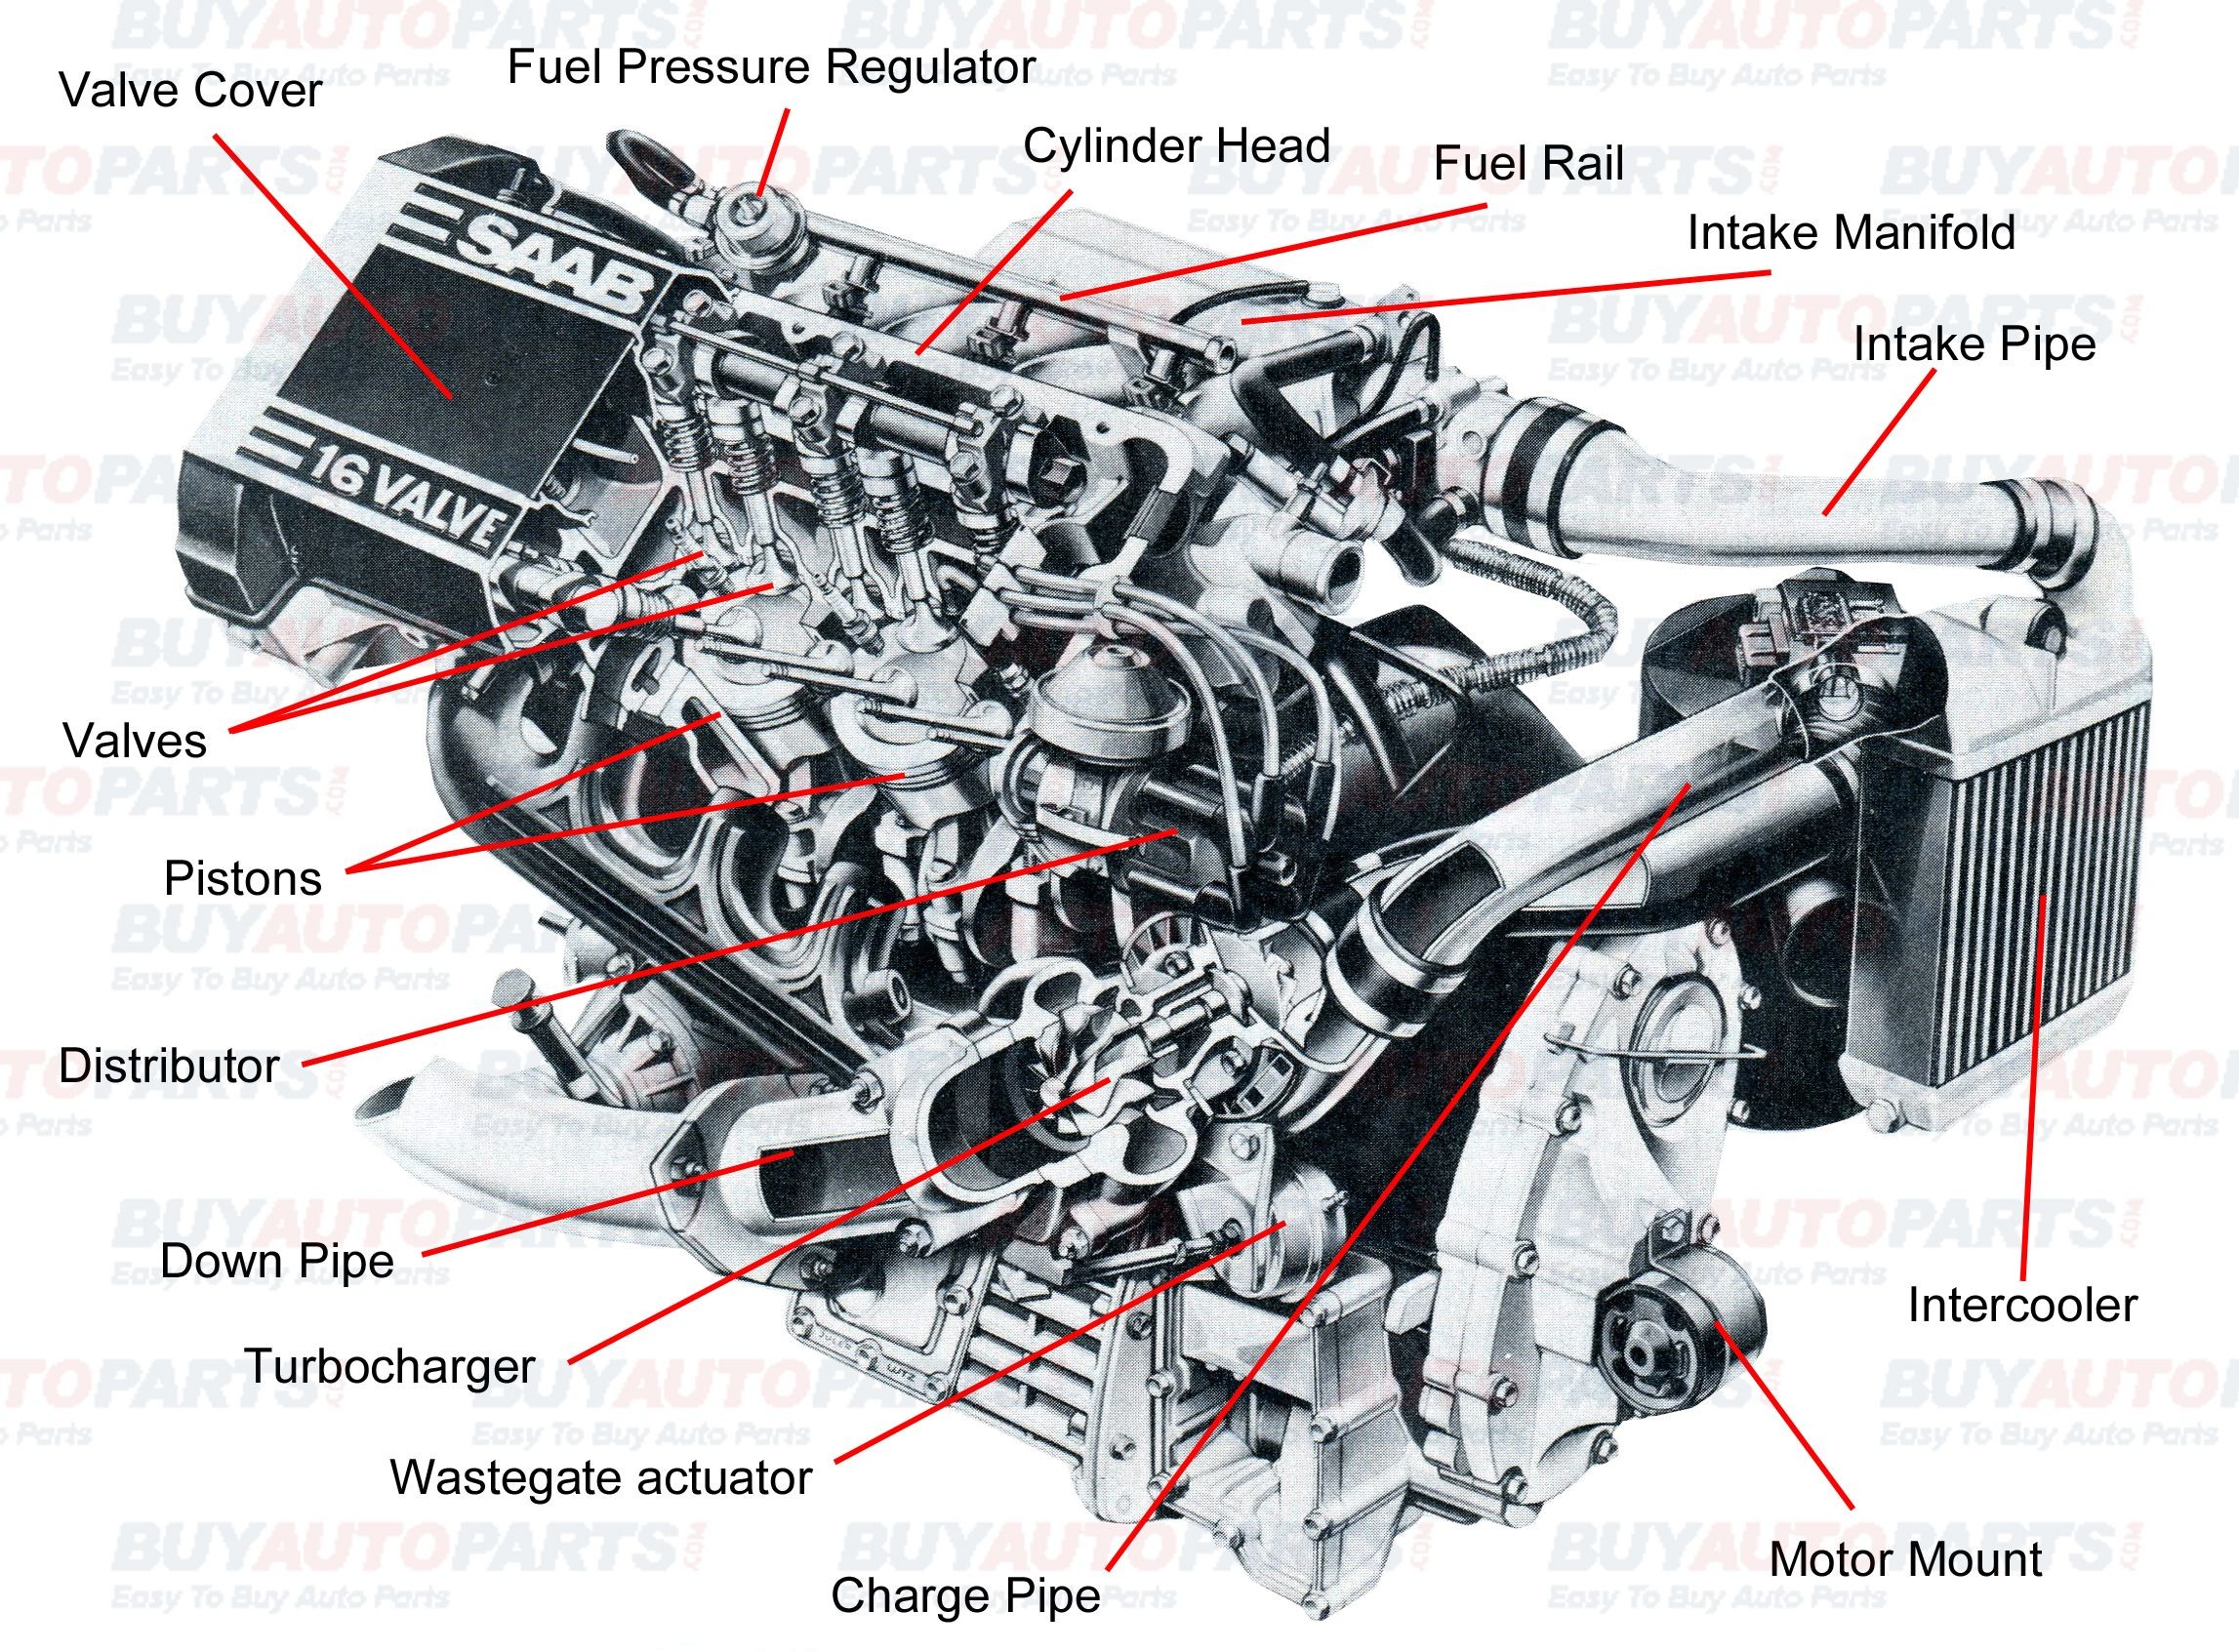 Car Brakes Diagram All Internal Bustion Engines Have the Same Basic Ponents the Of Car Brakes Diagram